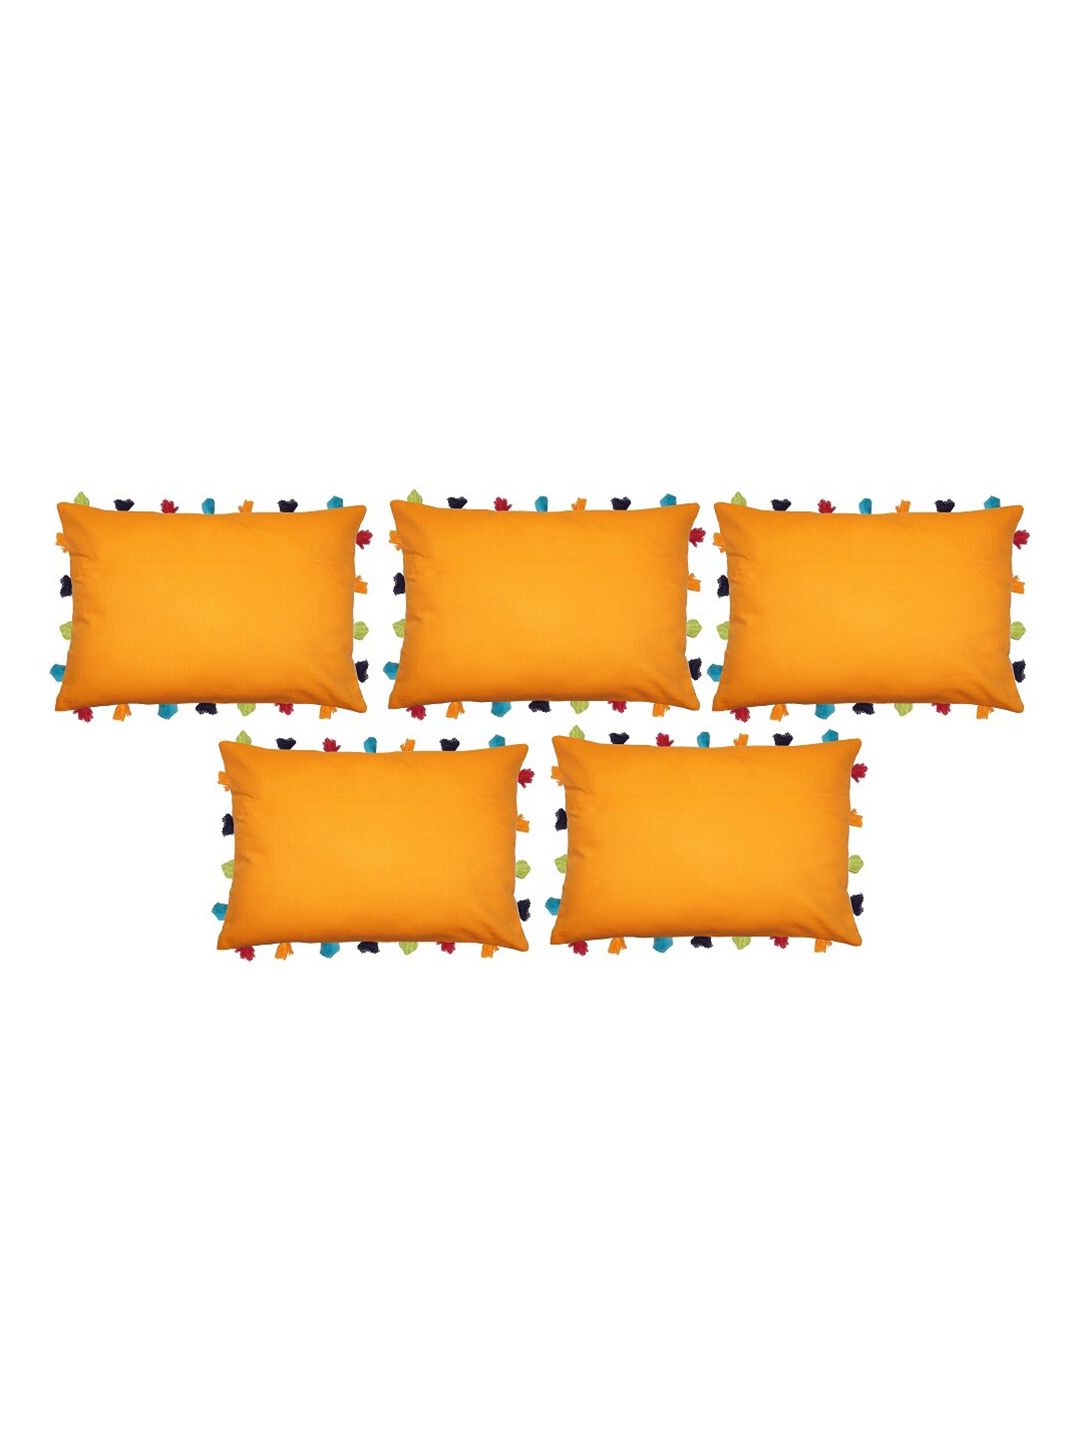 Lushomes Orange & Green Pack of 5 Rectangle Cushion Covers Price in India